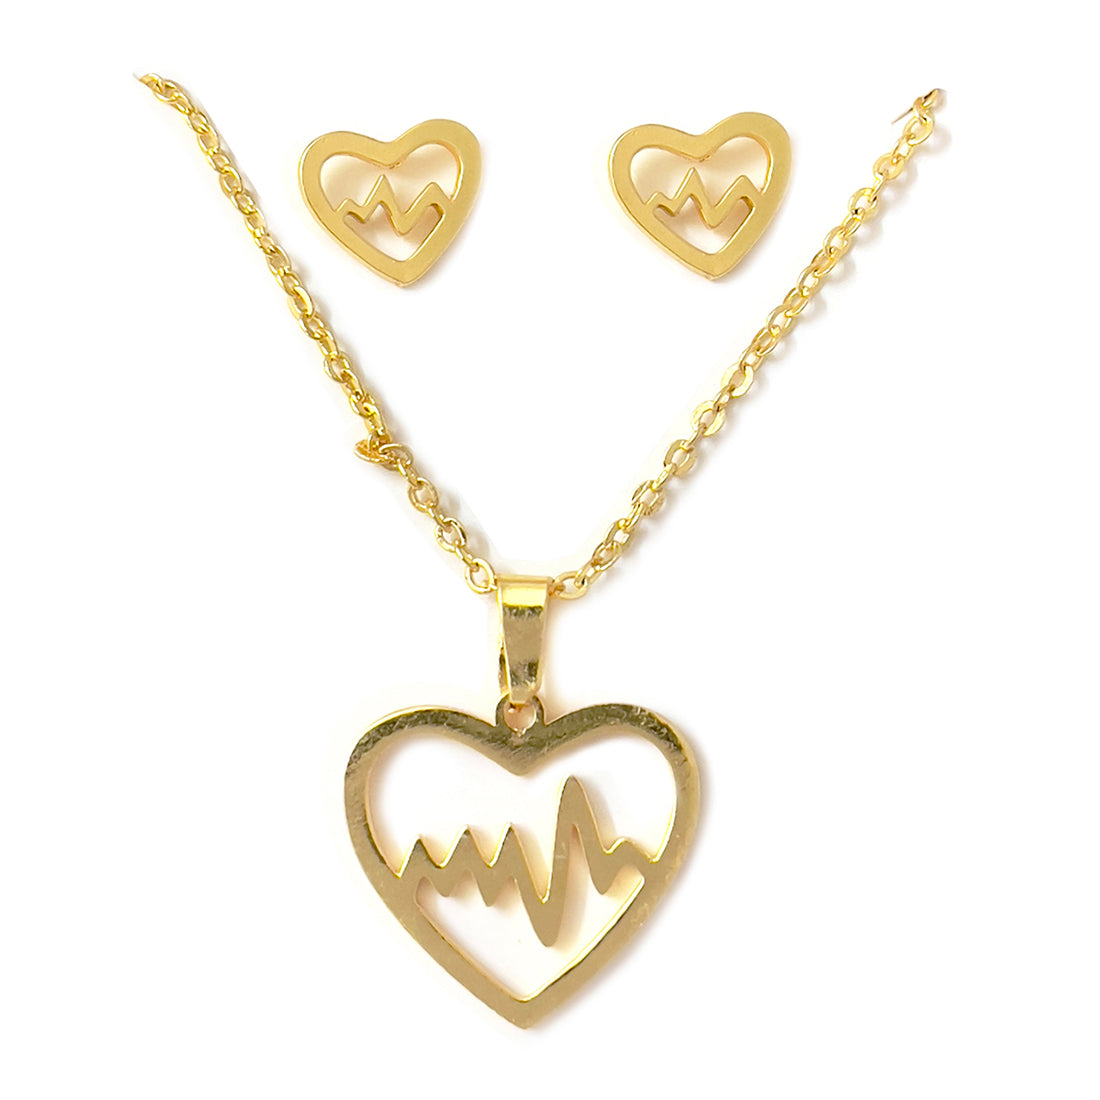 SET OF TWO HEARTBEAT GOLD-TONED PENDANT NECKLACE & EARRINGS SET